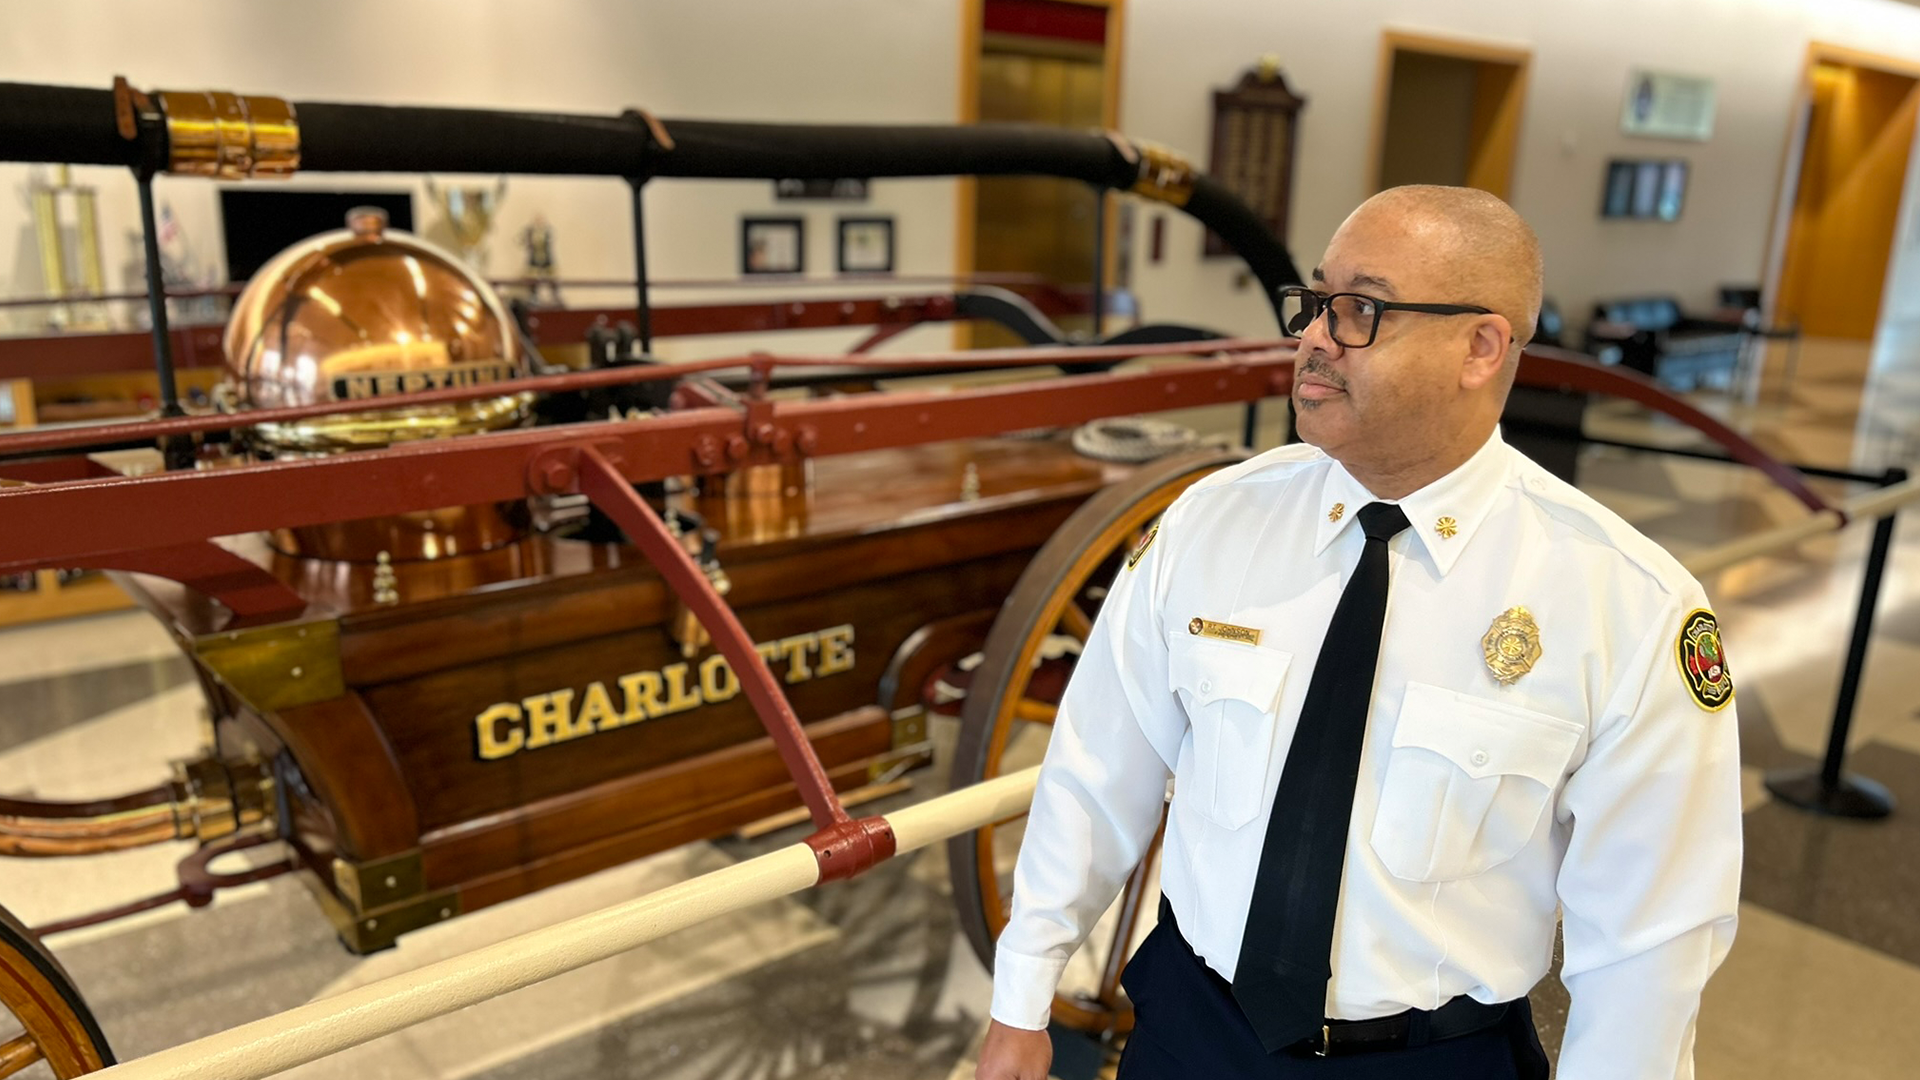 Charlotte Fire Chief Reginald T. Johnson in front of the Neptune pumper at Charlotte Fire headquarters.